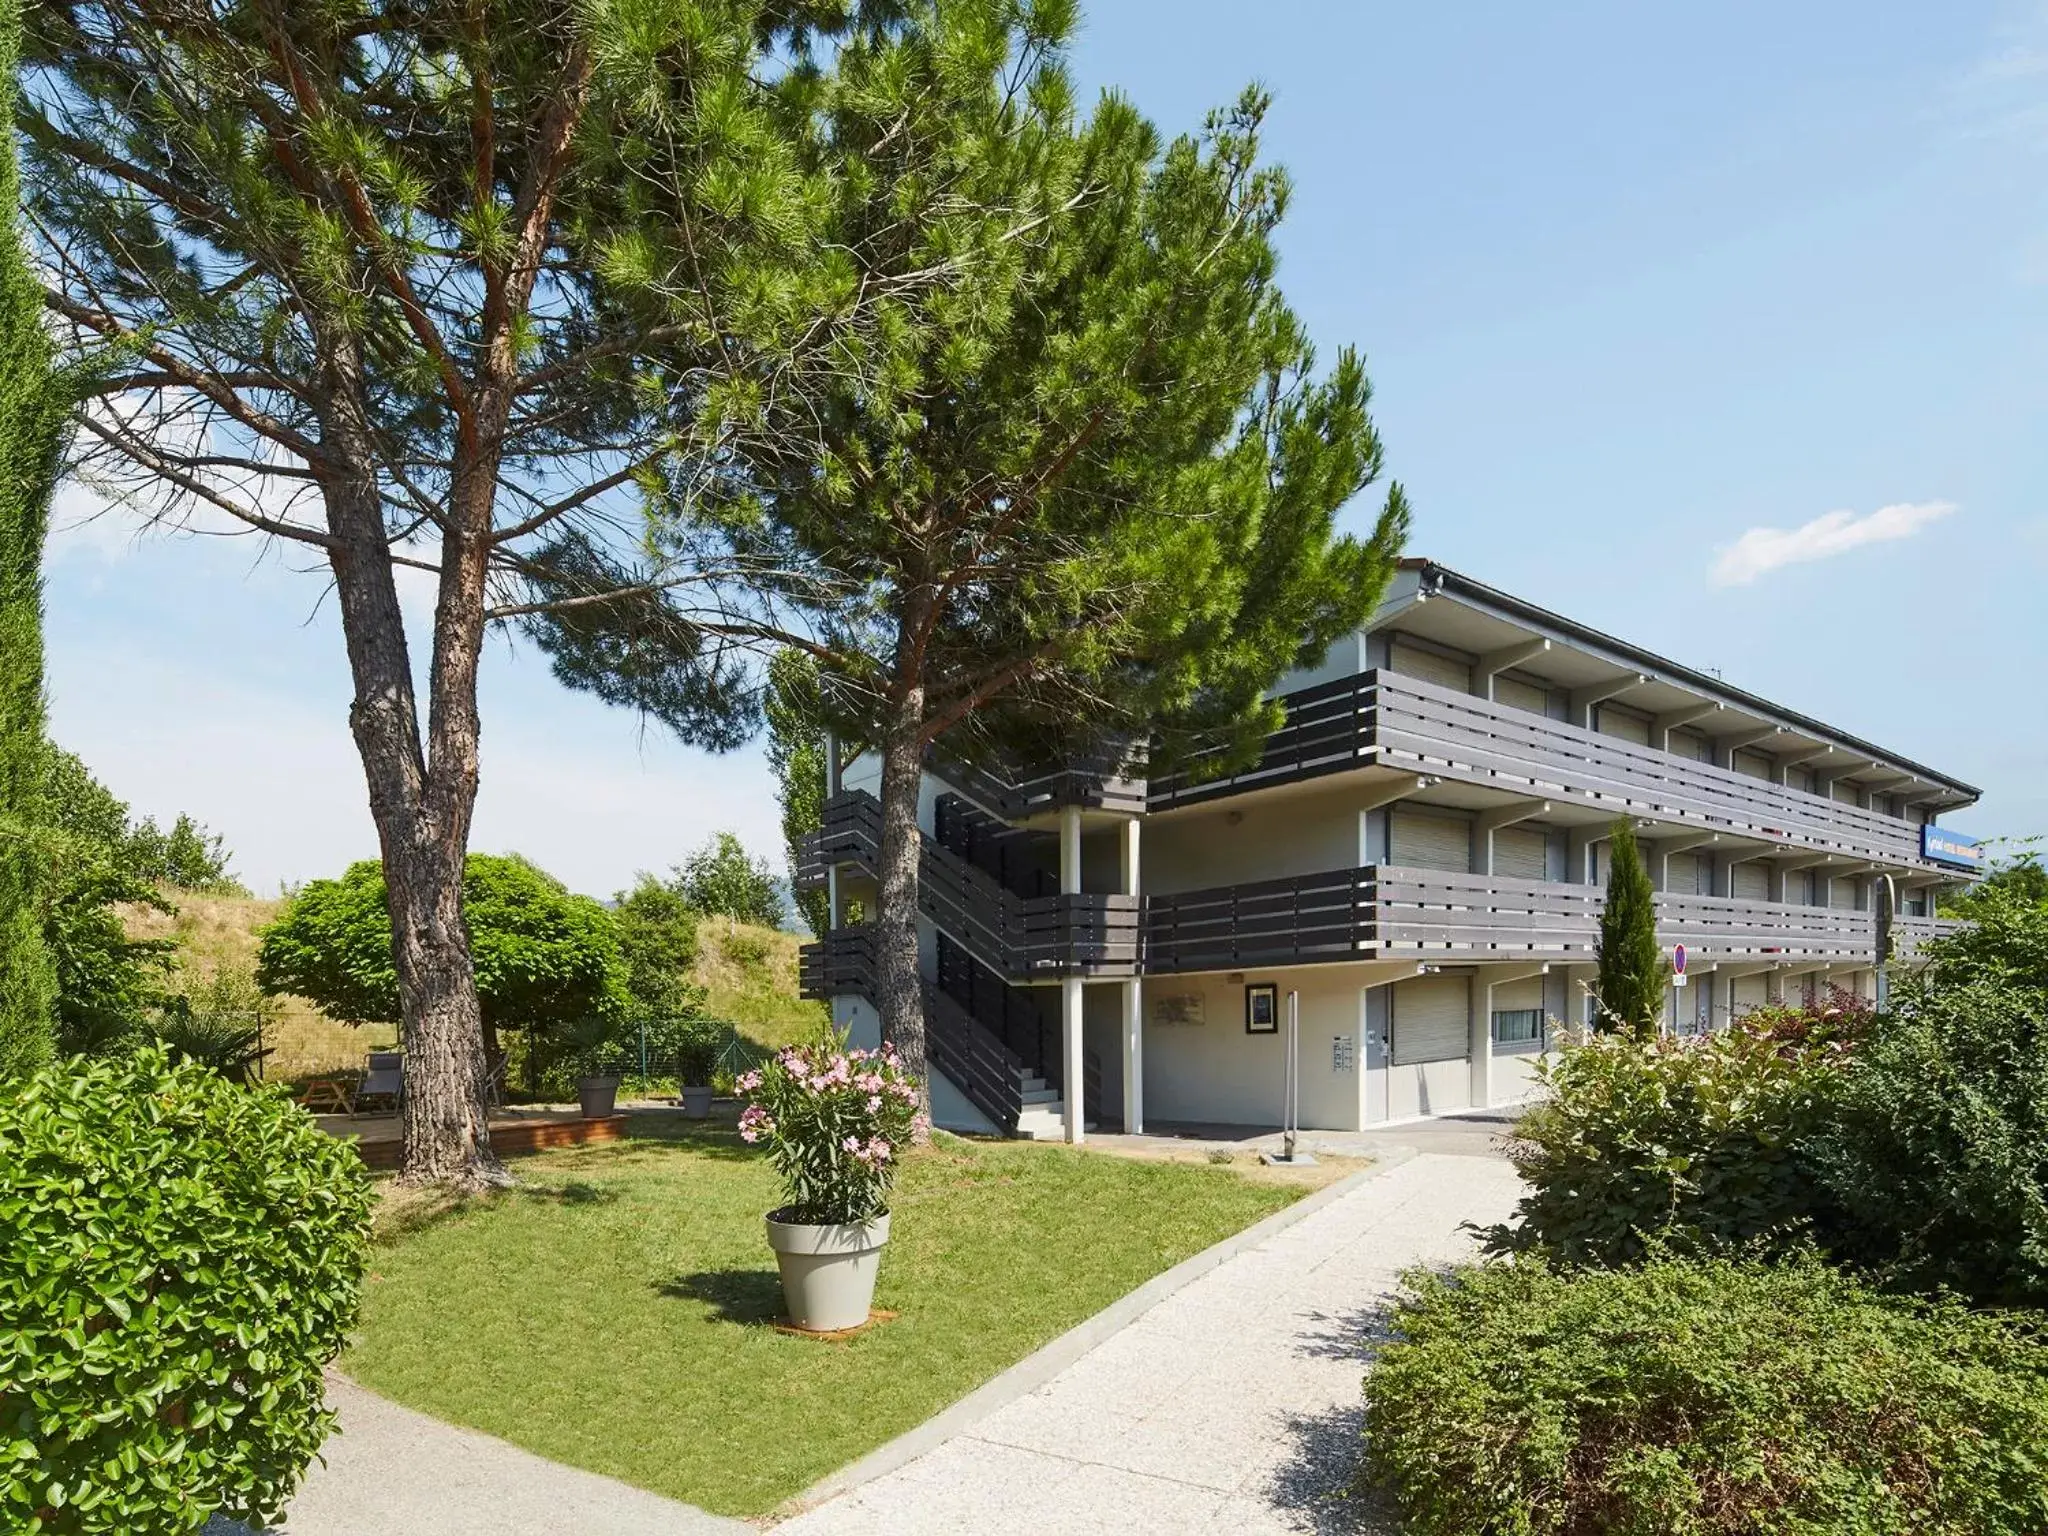 Property Building in Kyriad Digne-Les-Bains